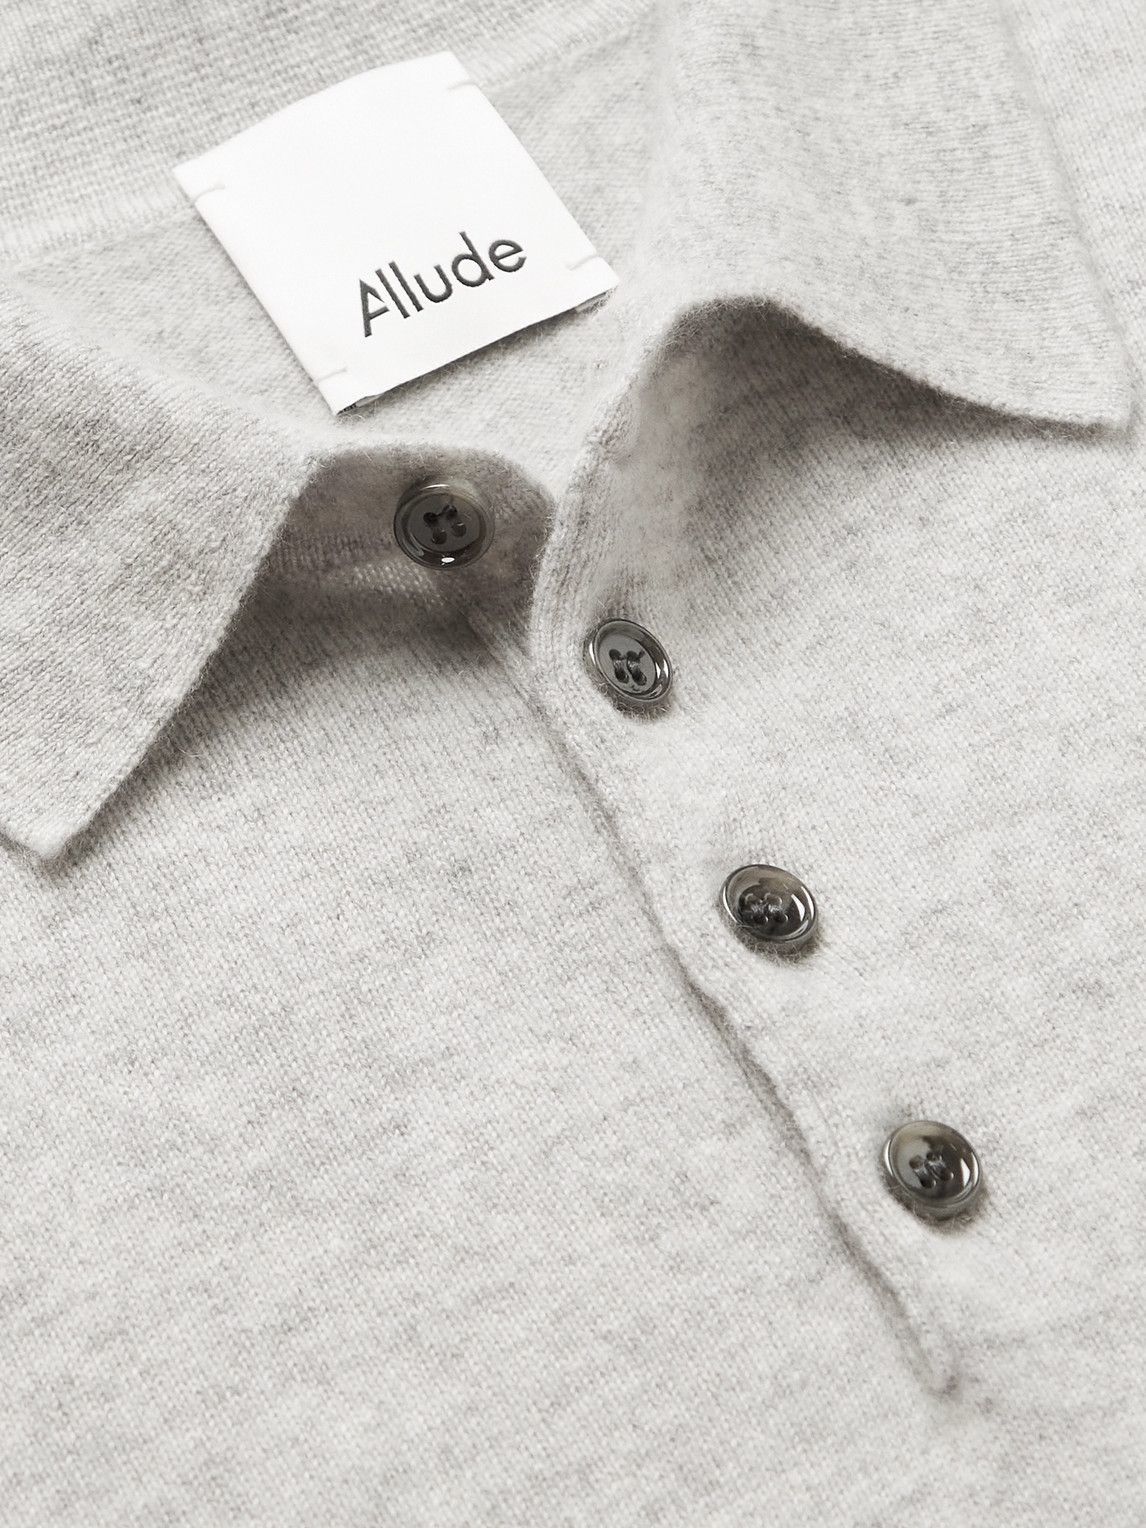 Allude - Cashmere Polo Shirt - Gray